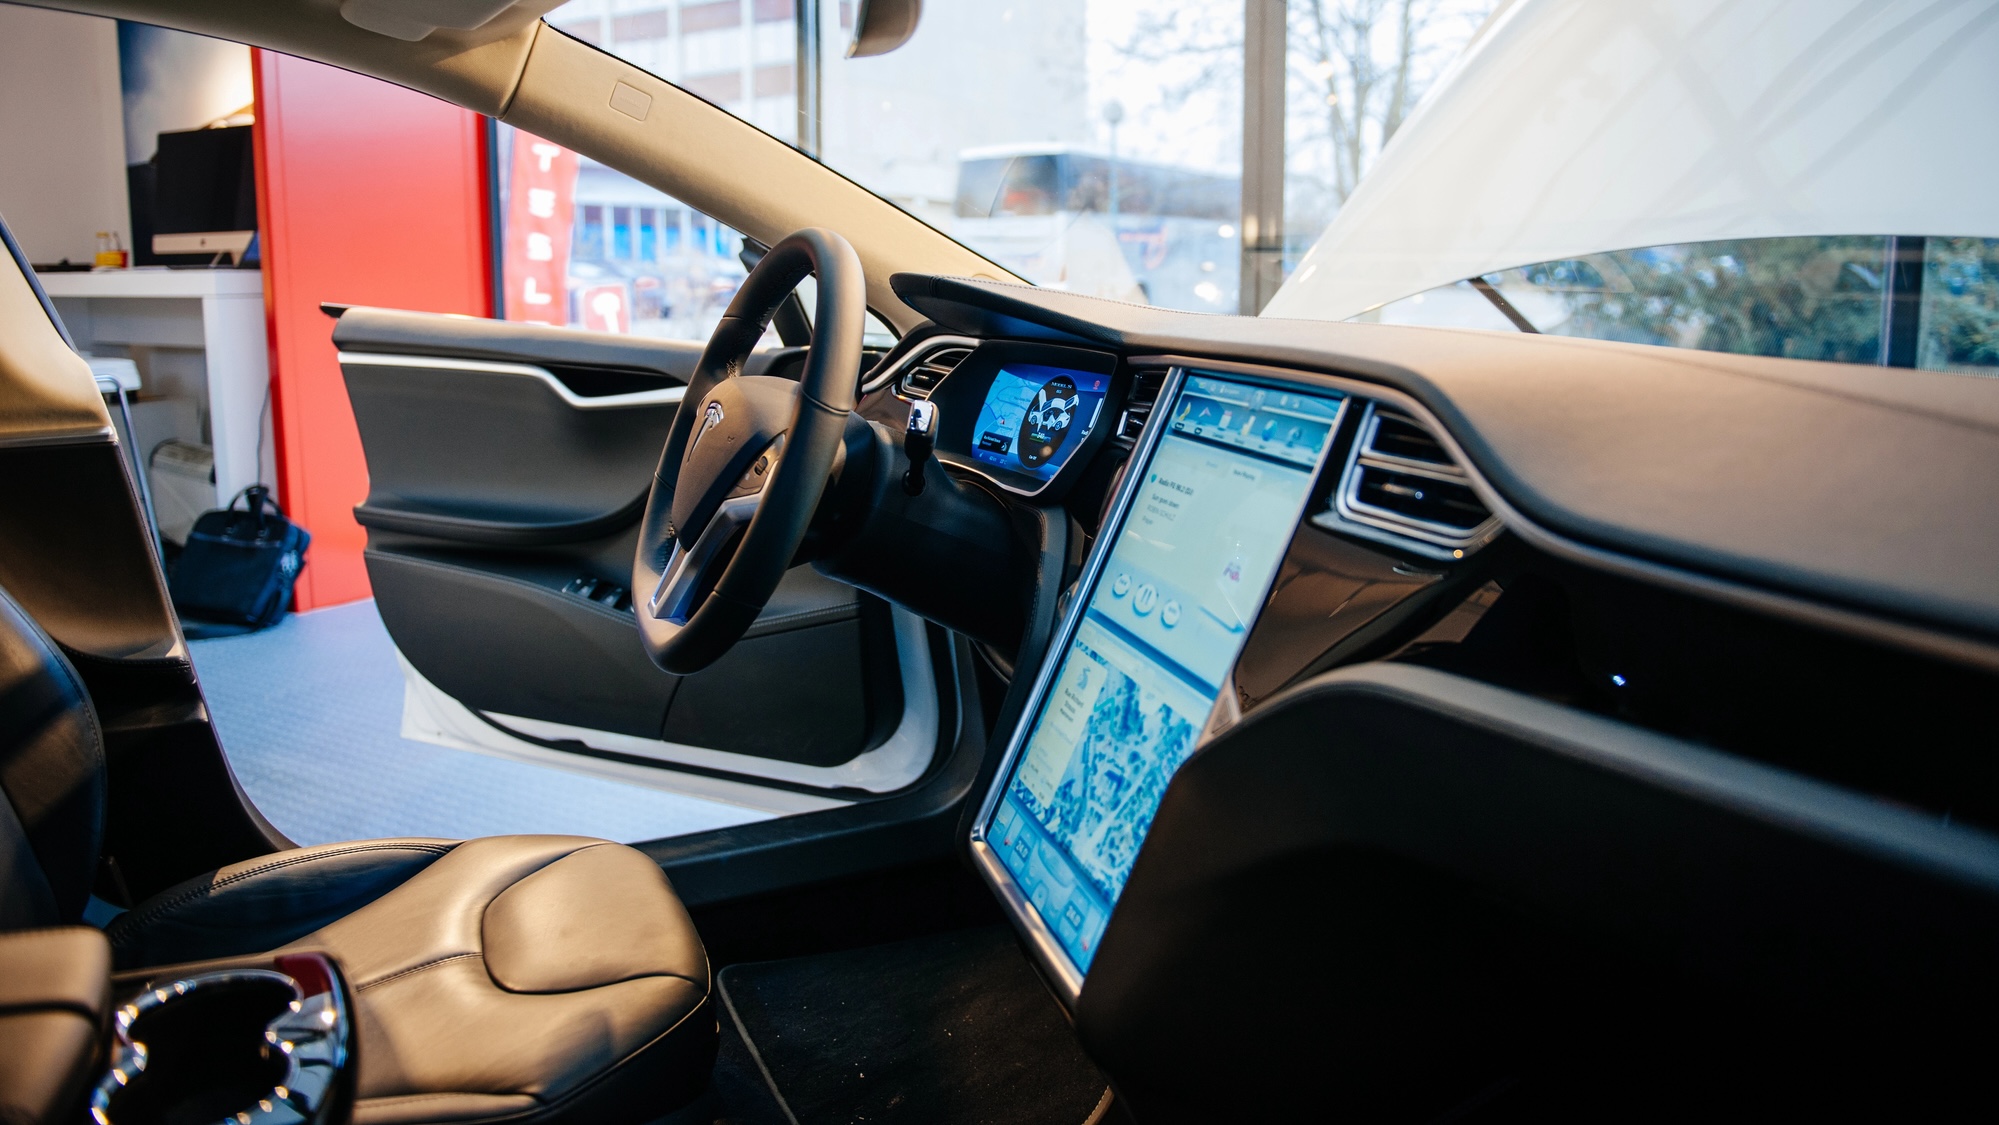 Tesla patents self-cleaning technology for its robotaxis that doesn't exist yet